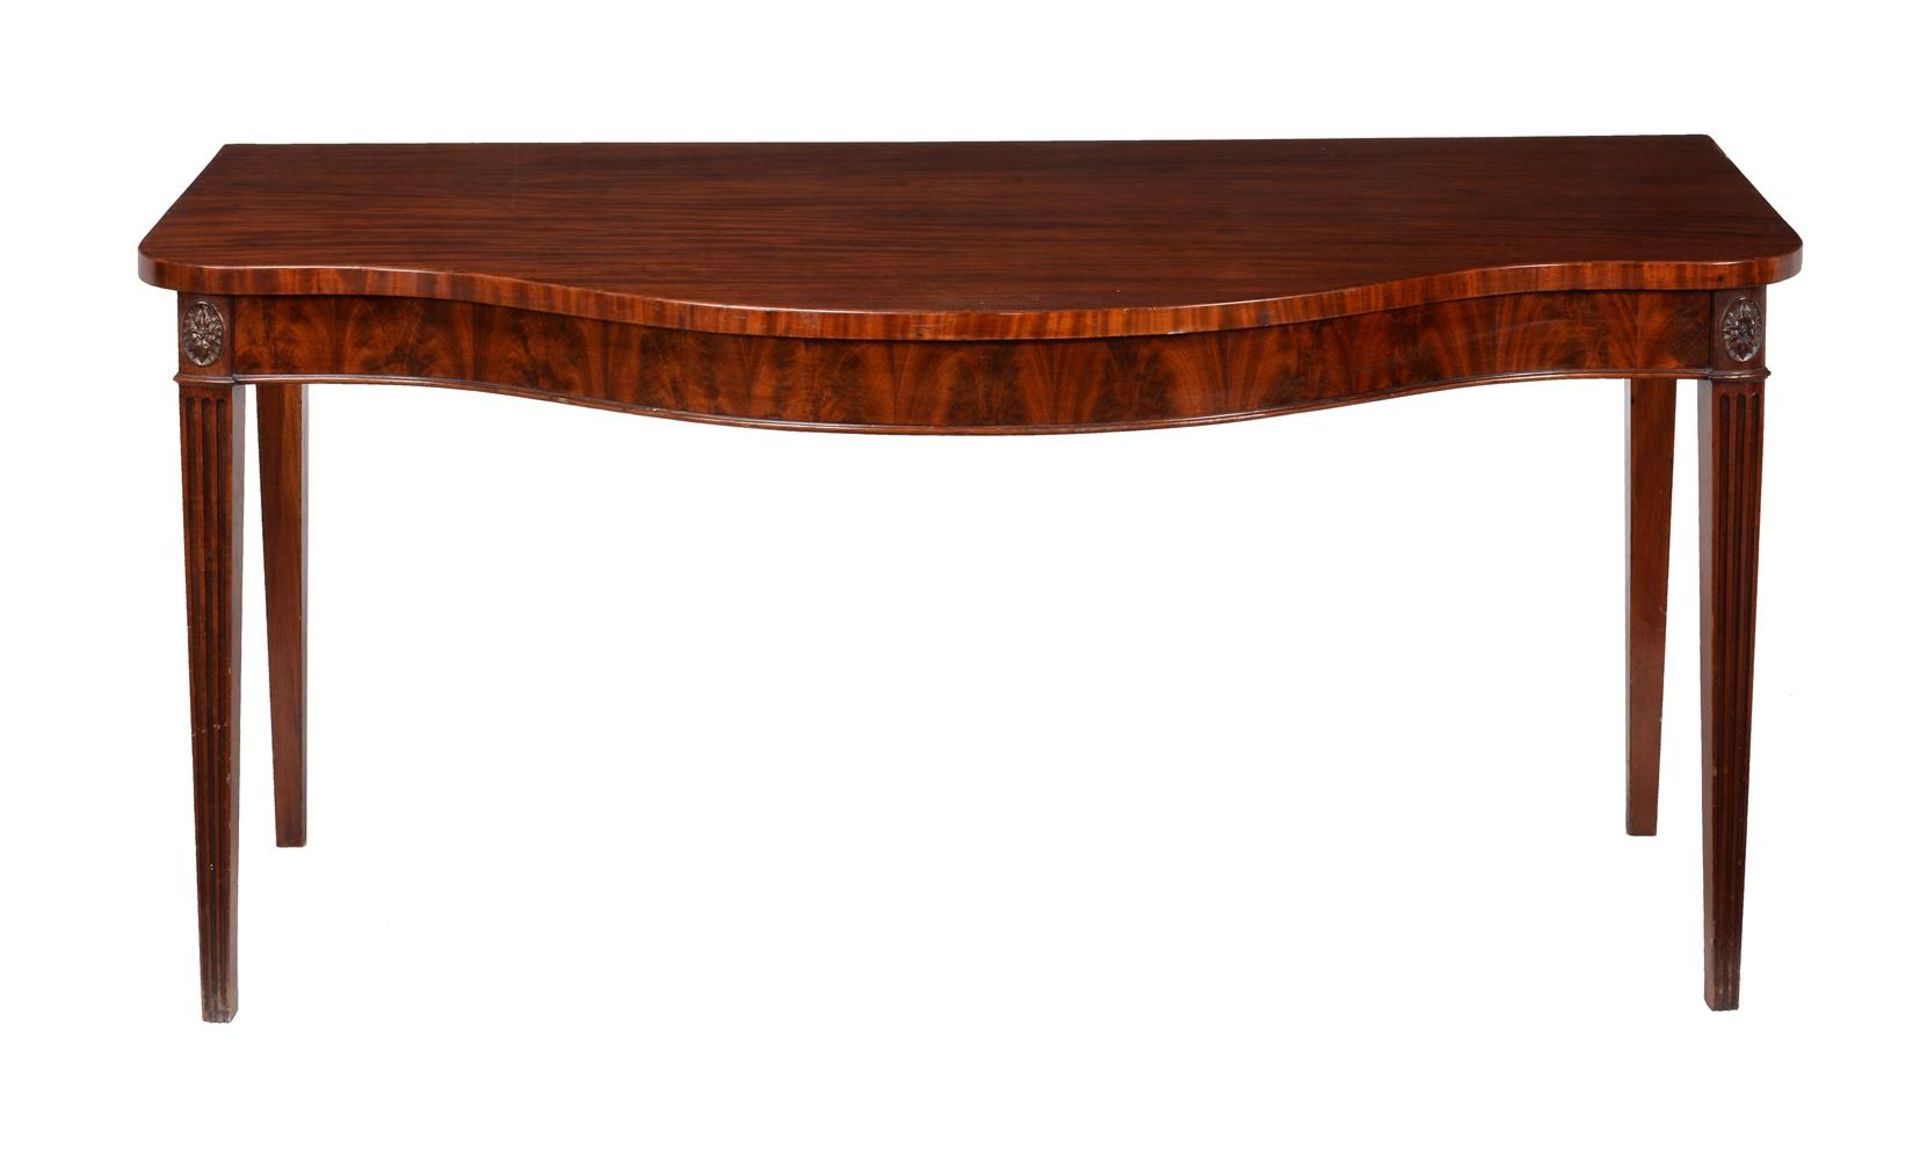 A MAHOGANY SERVING TABLE IN GEORGE III STYLE